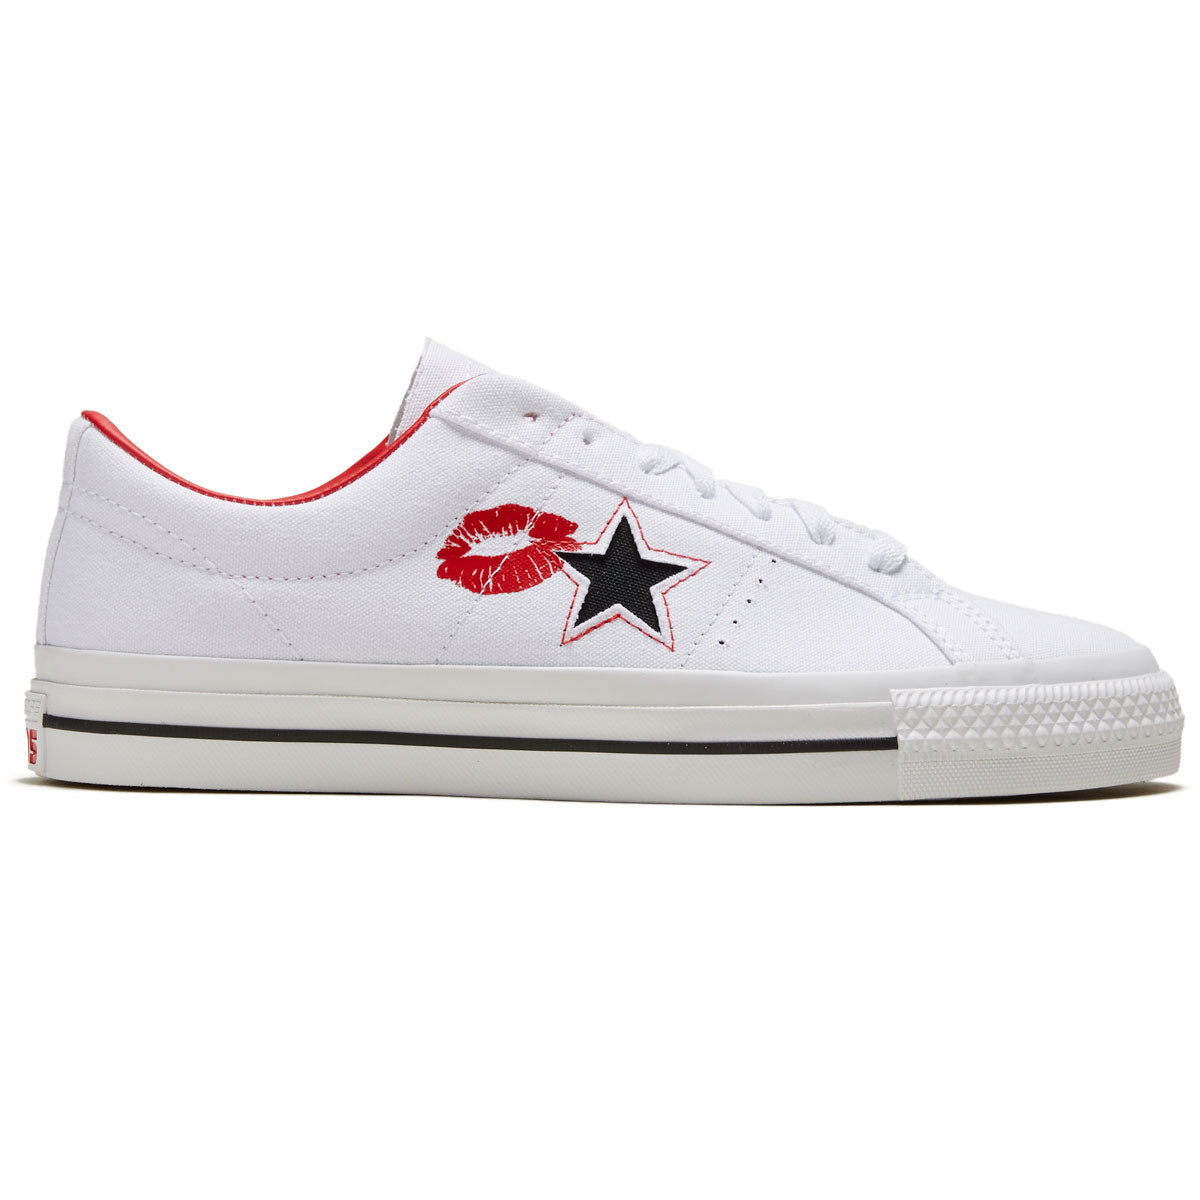 Converse One Star Pro Lips Shoes - White/Black/Red image 1